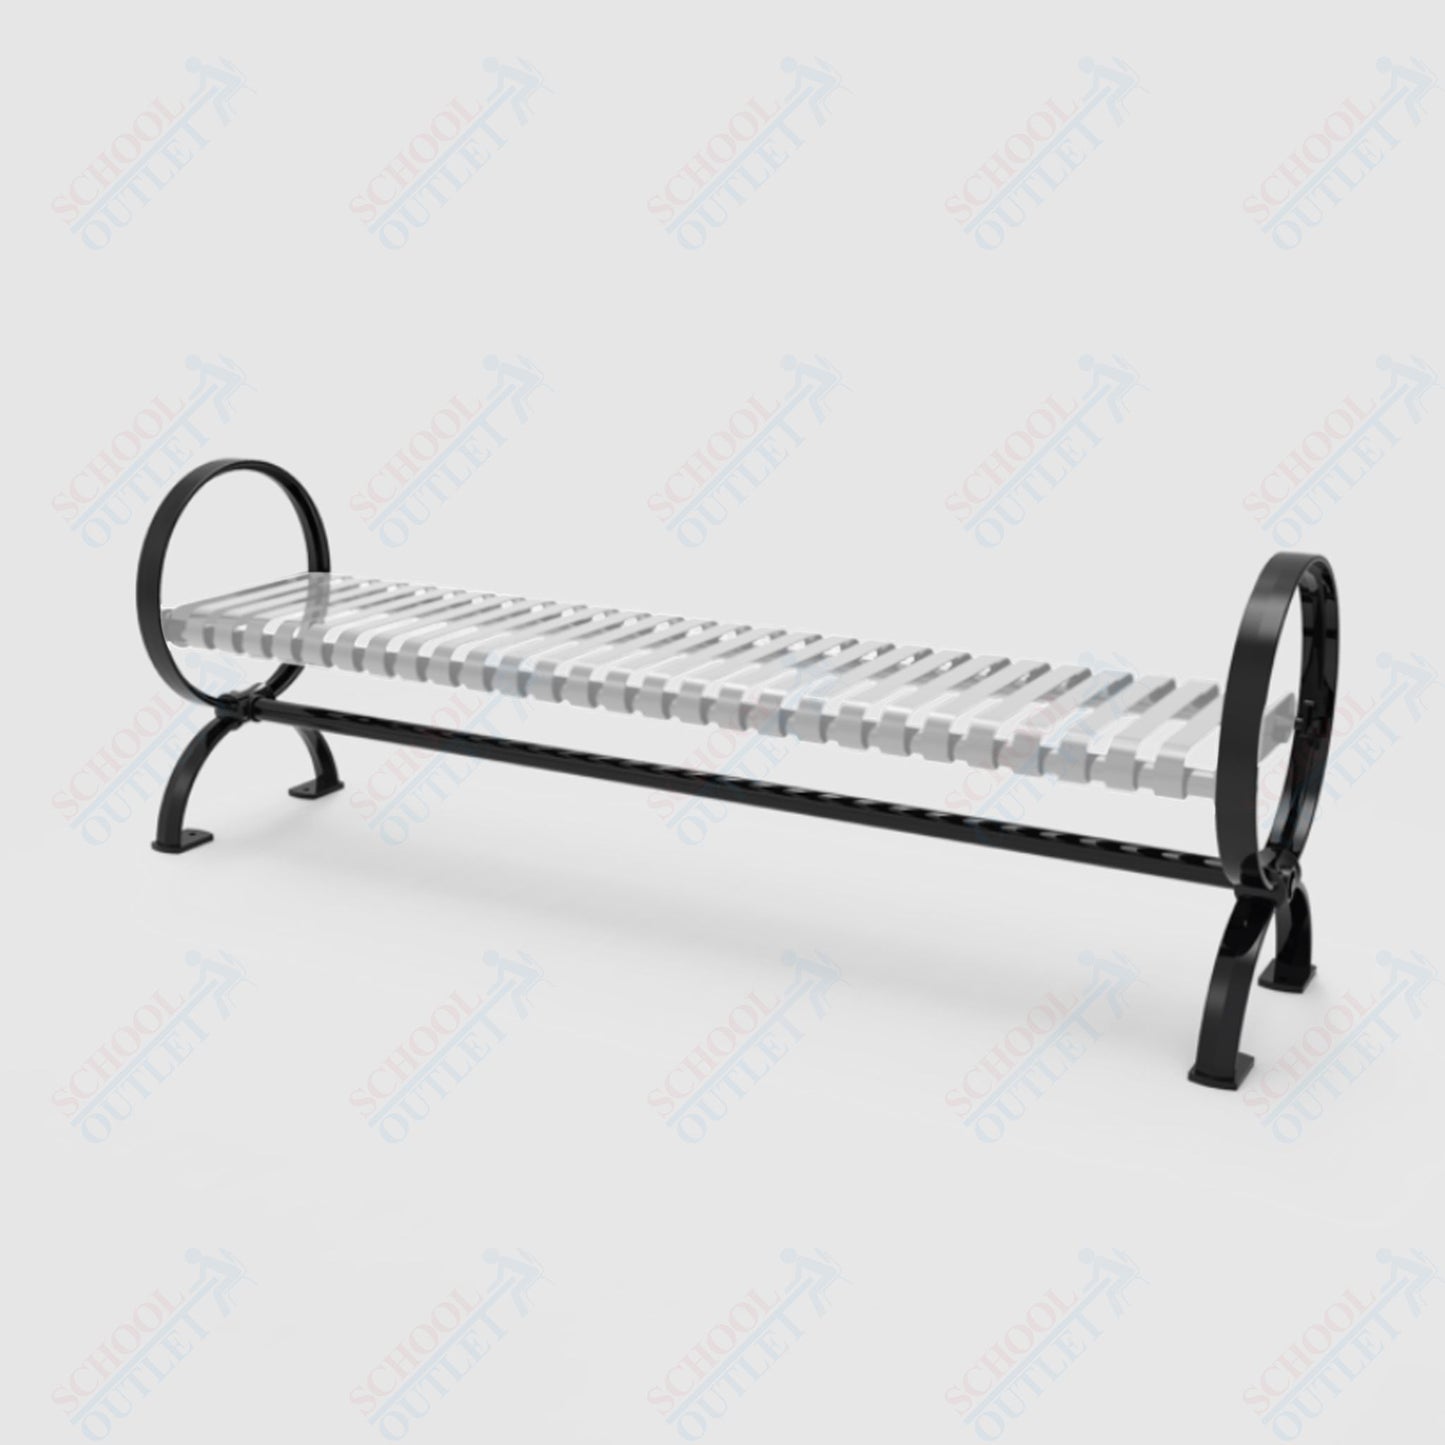 MyTcoat - Skyline Outdoor Bench with Arched Back - Portable or Surface Mount 6' L (MYT-BSL06-O-57)